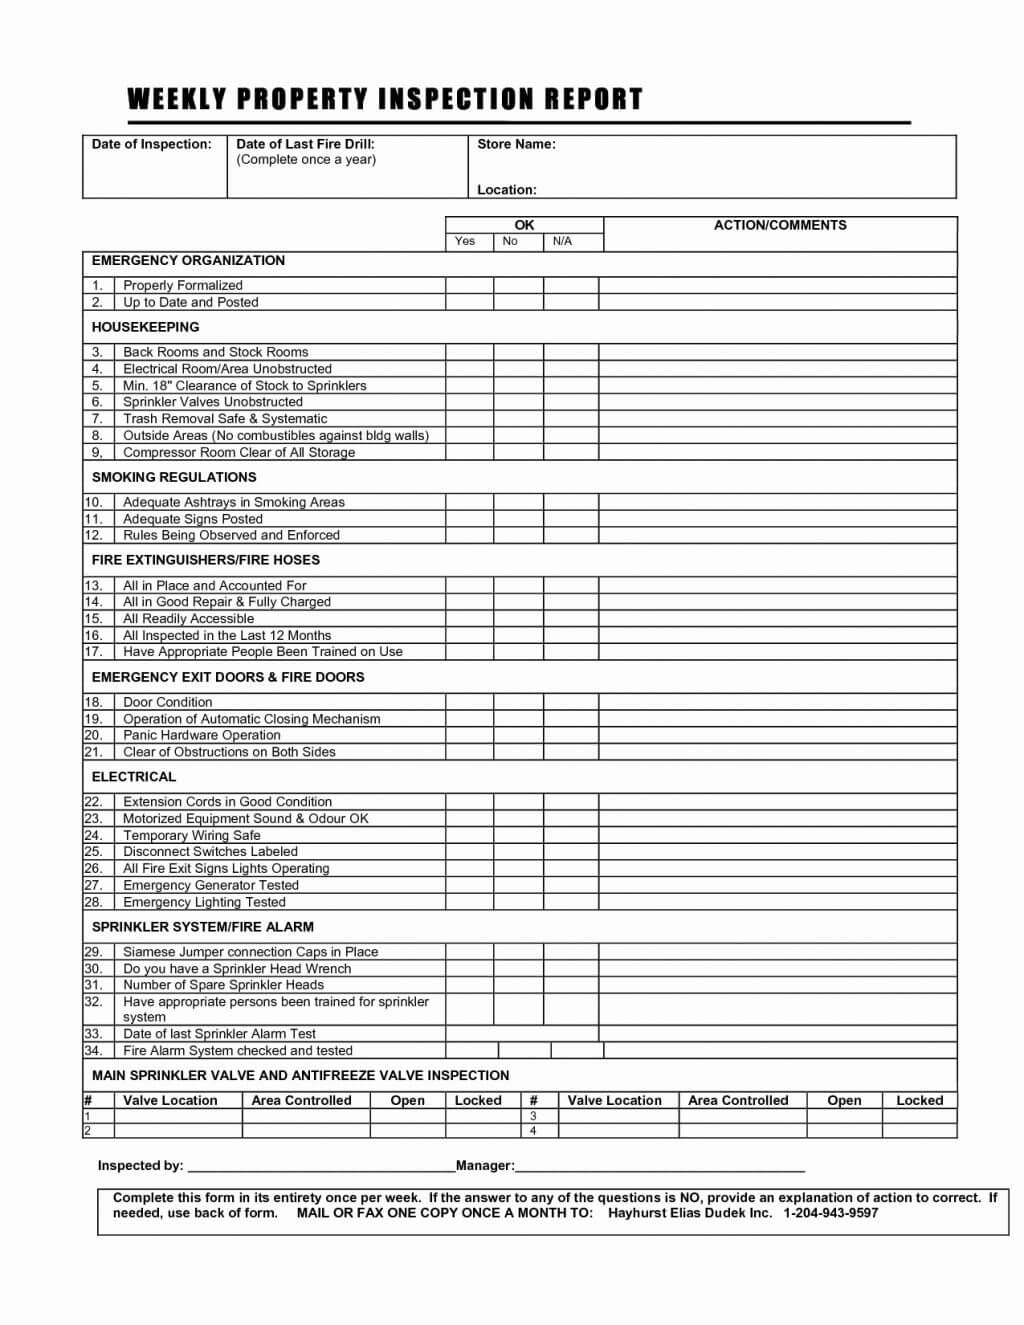 Building Inspection Report Sample Property Template E2 80 93 Within Commercial Property Inspection Report Template